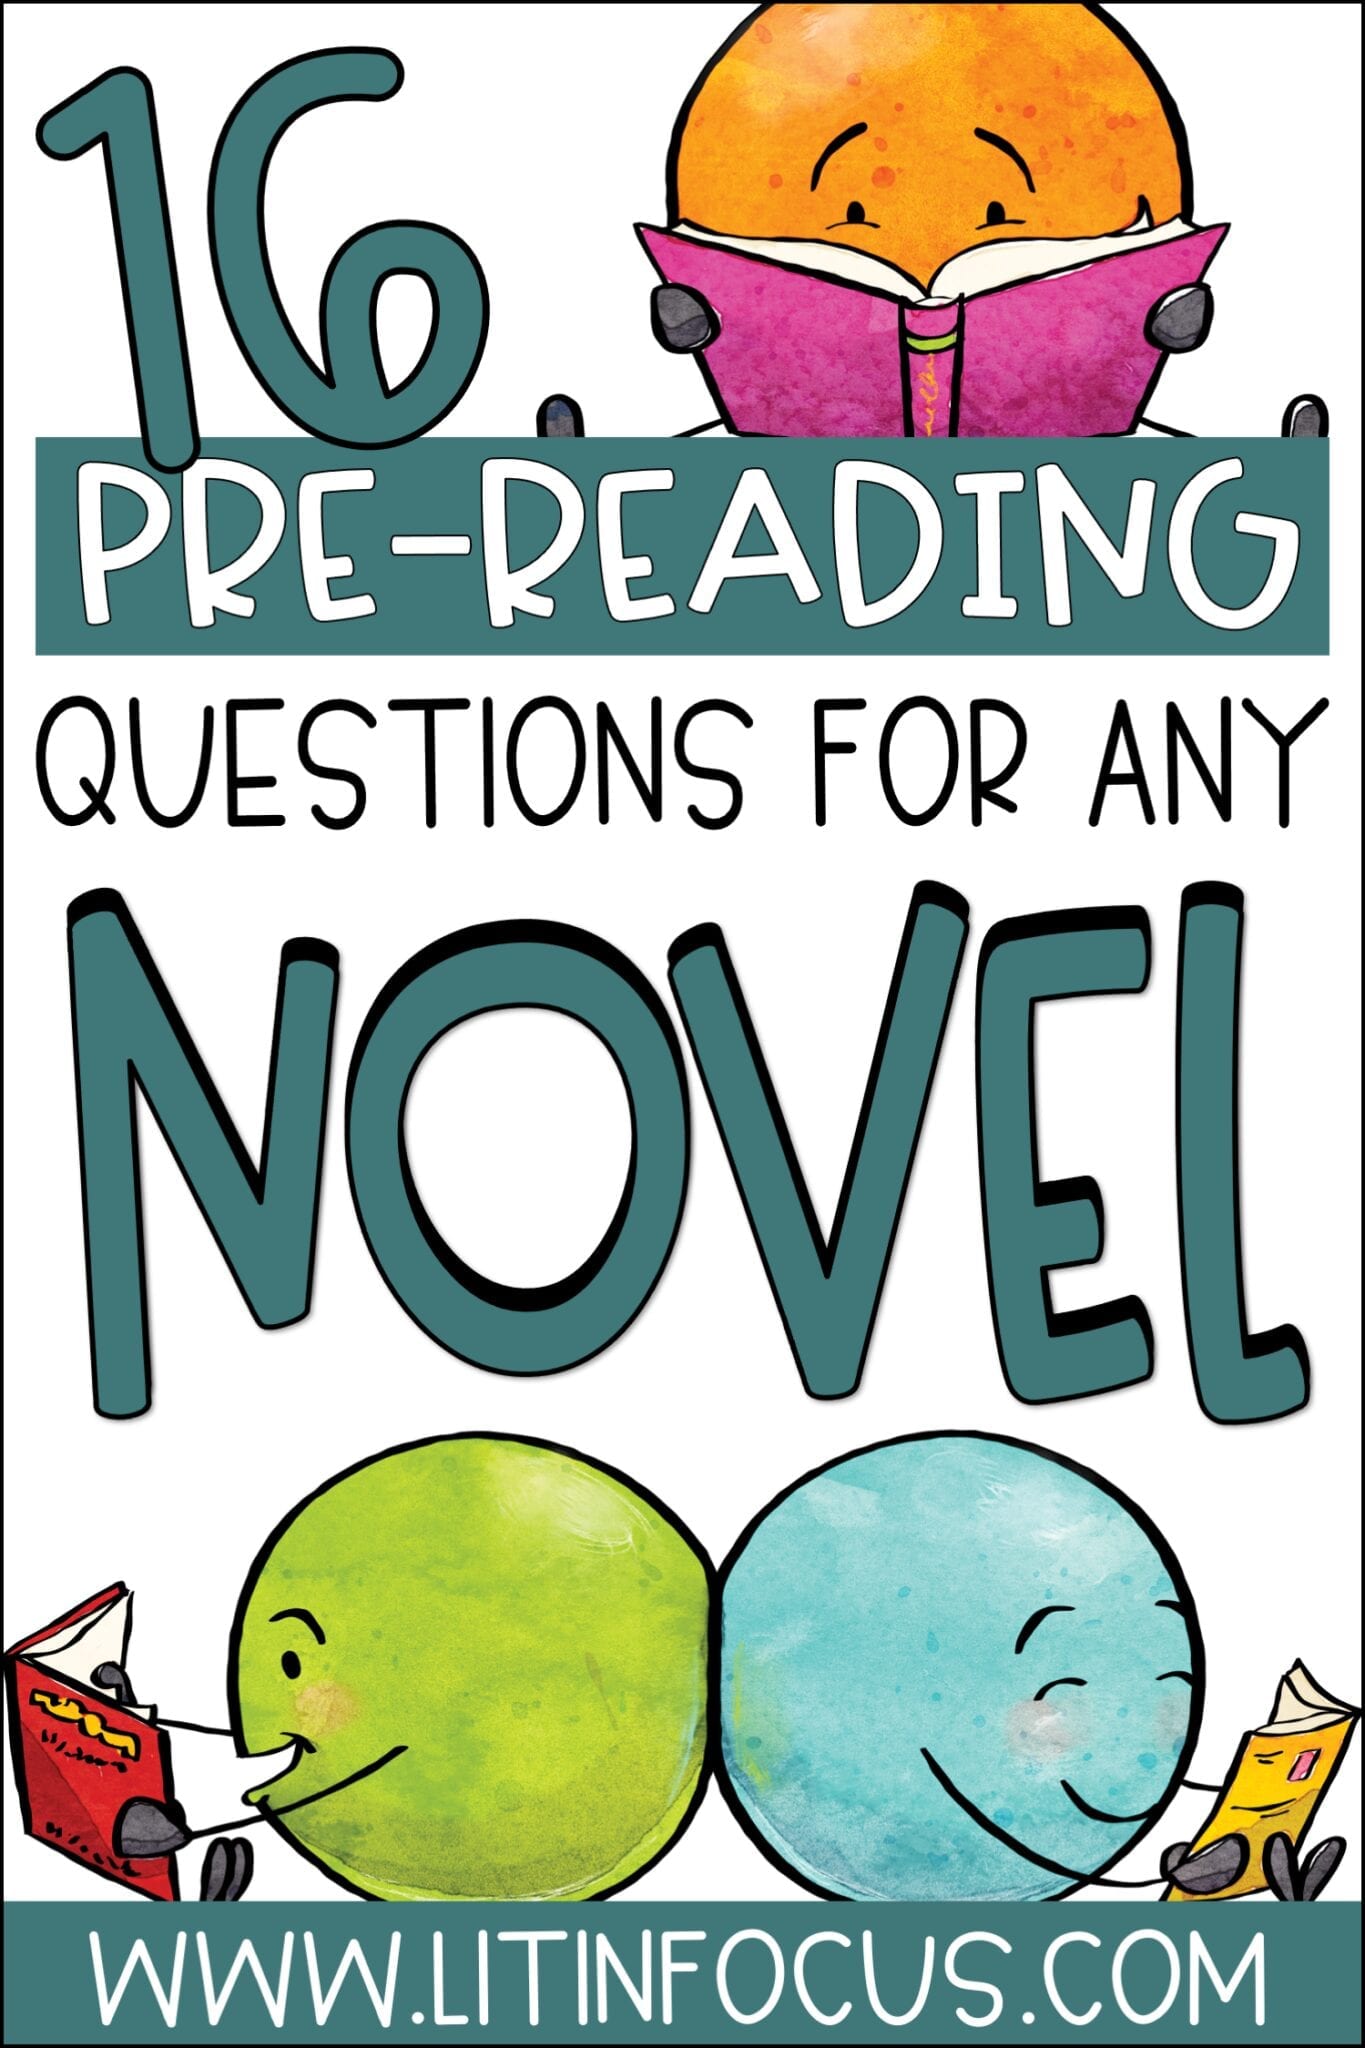 16 Pre-Reading Questions For Any Novel